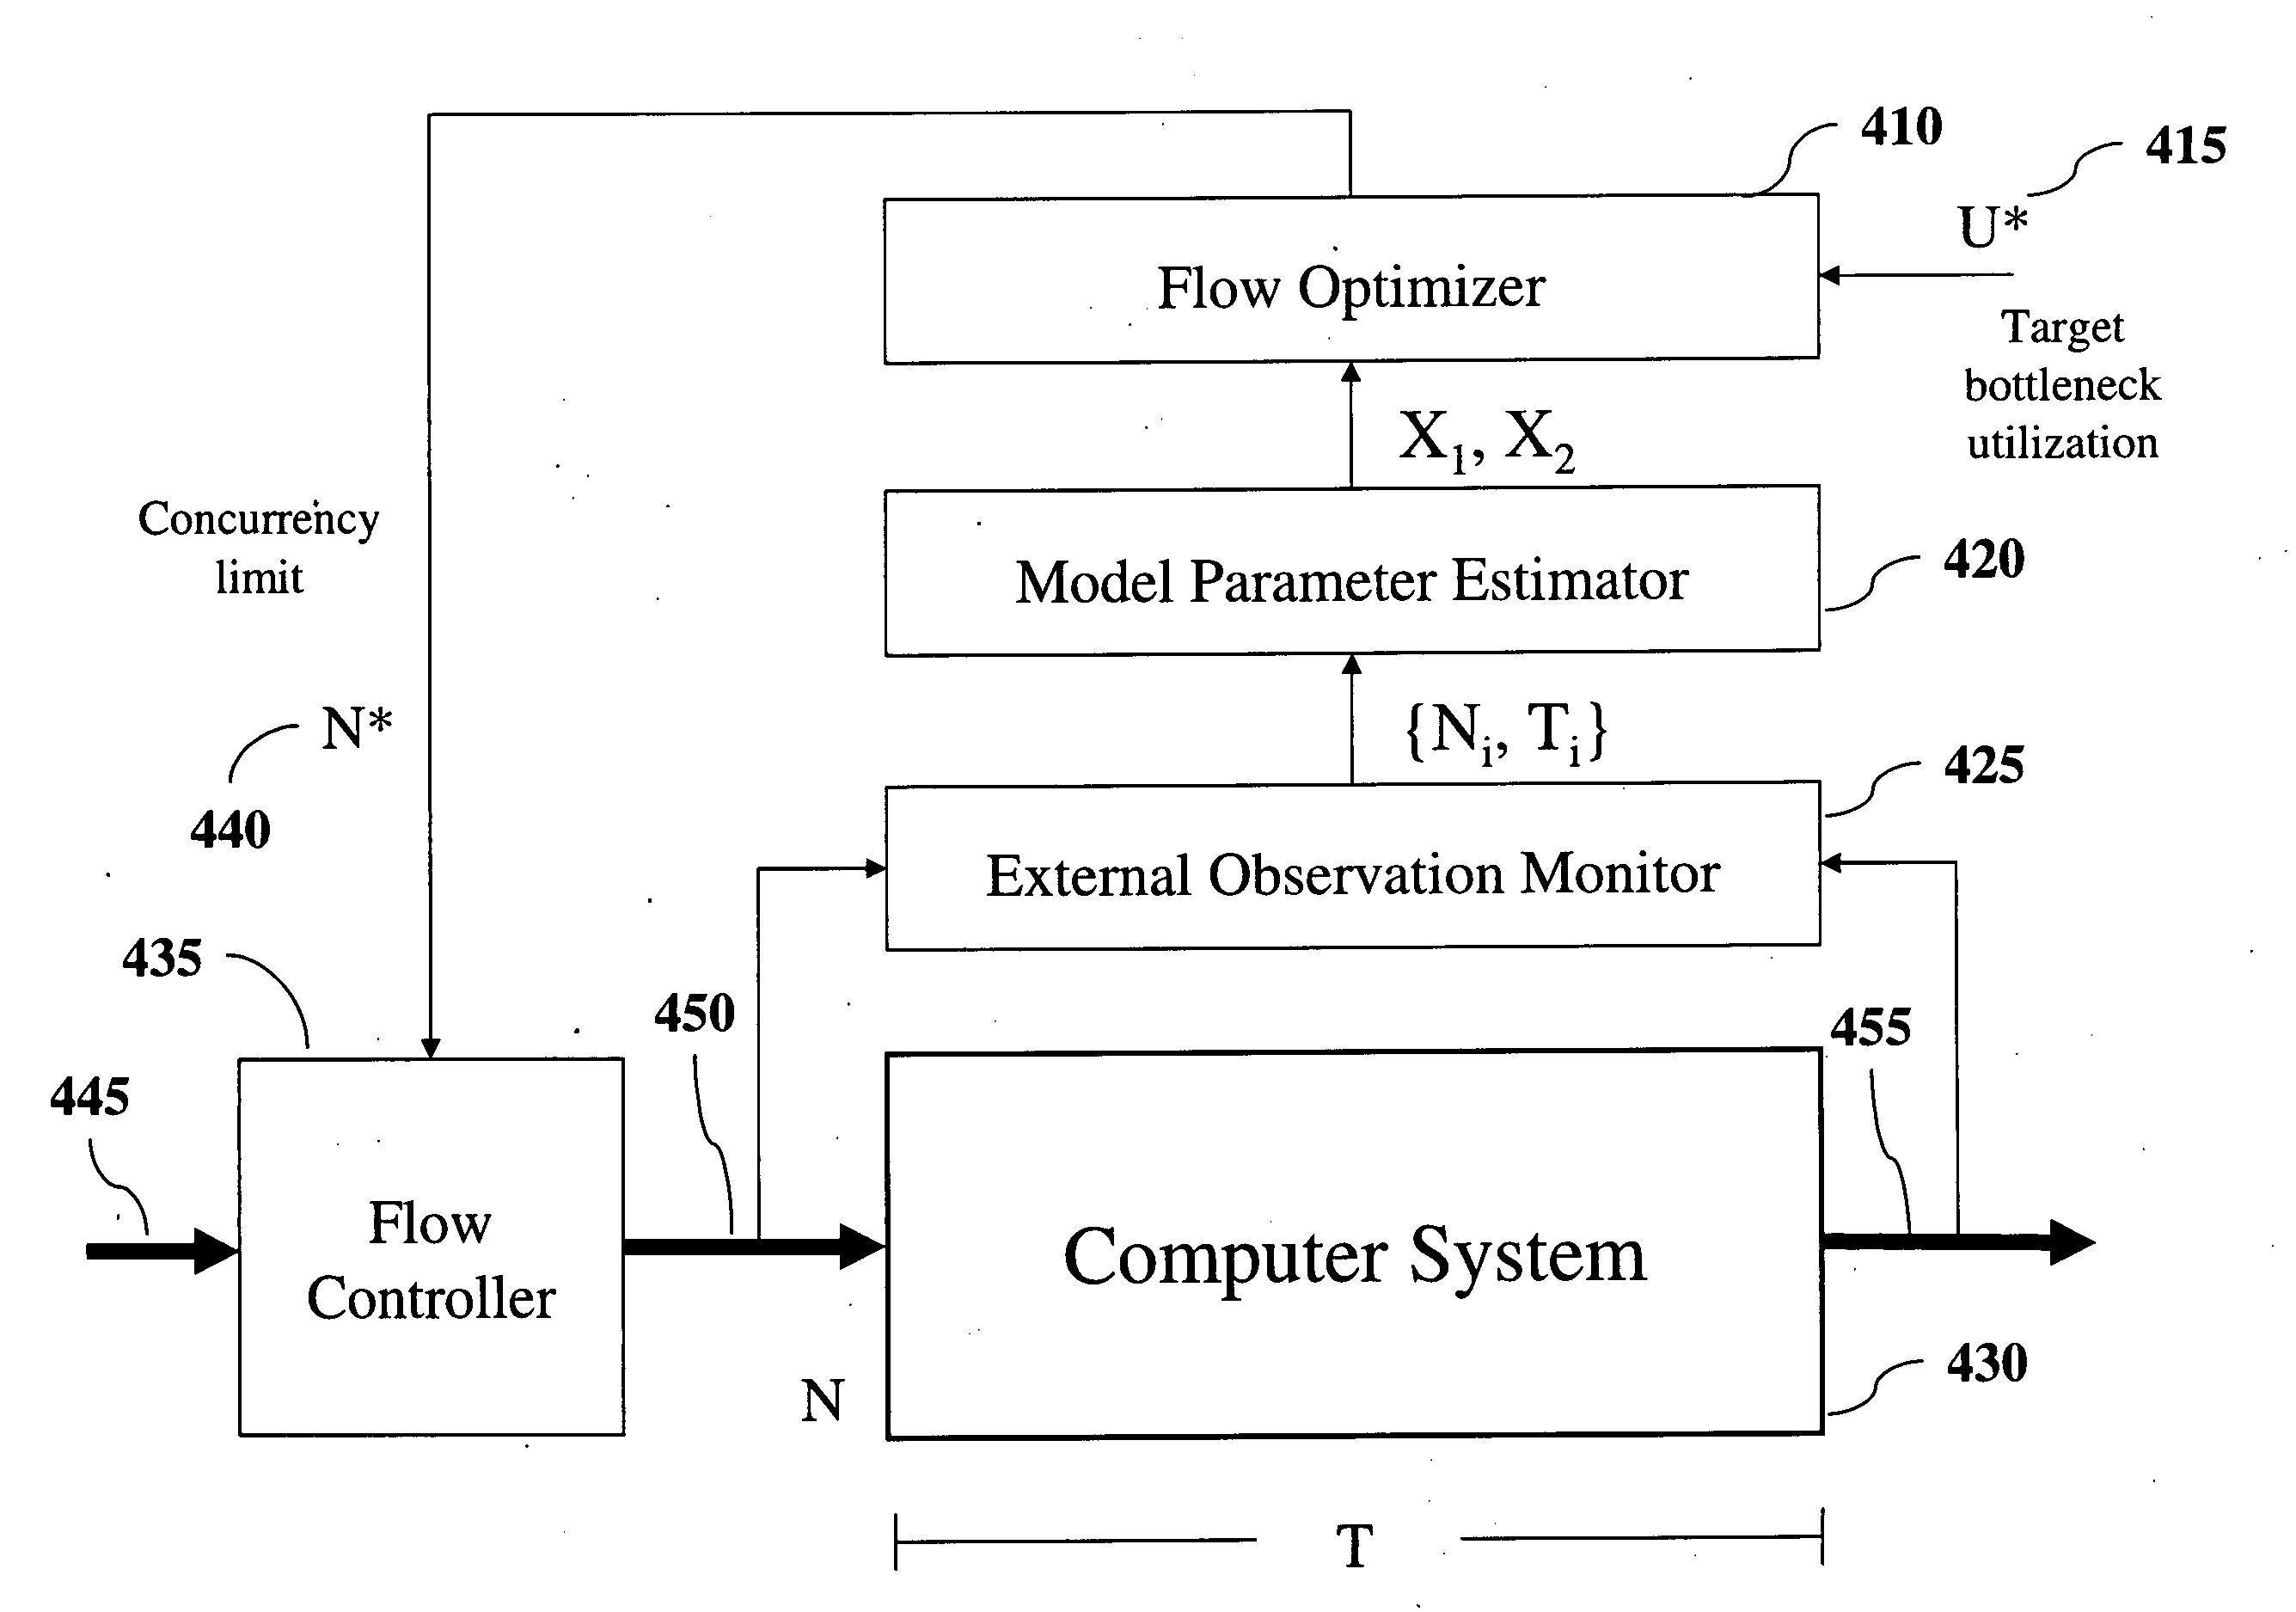 Controlling workload of a computer system through only external monitoring